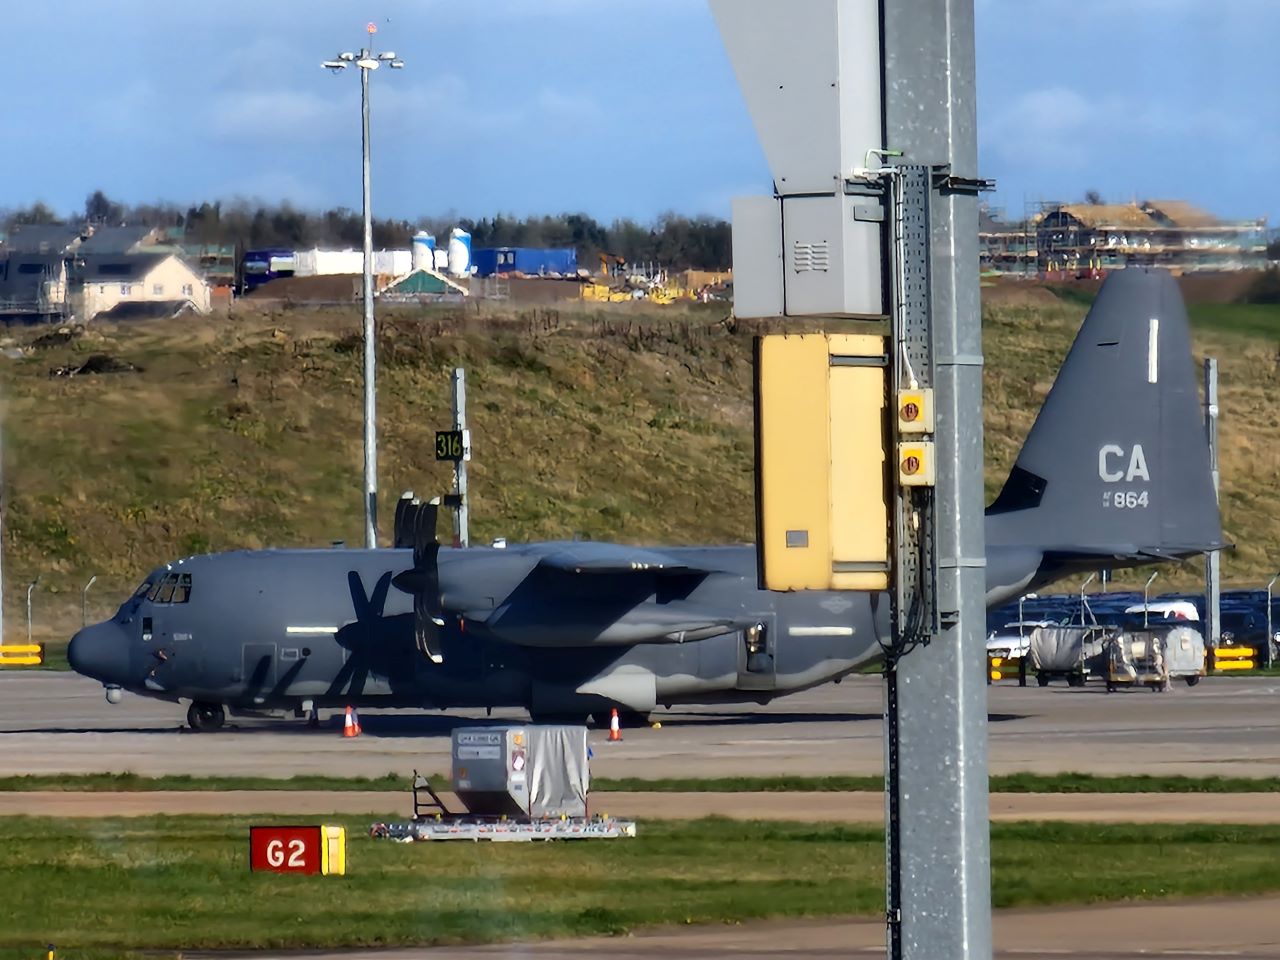 USAF Hercules (Better focus but pole in the way)